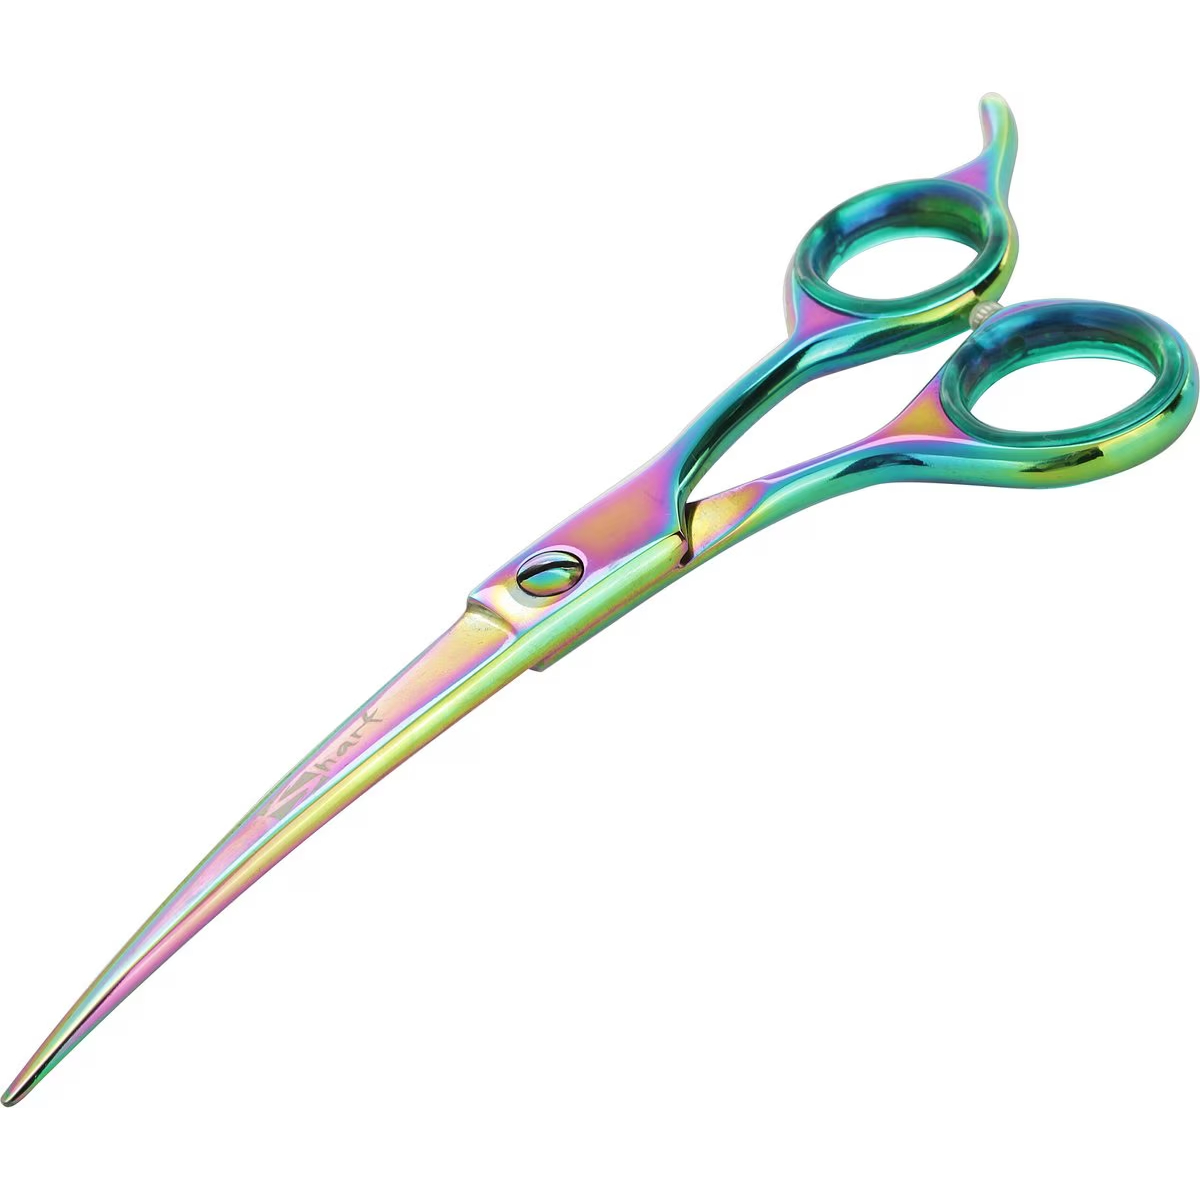 Sharf Gold Touch Rainbow Curved Pet Grooming Shear